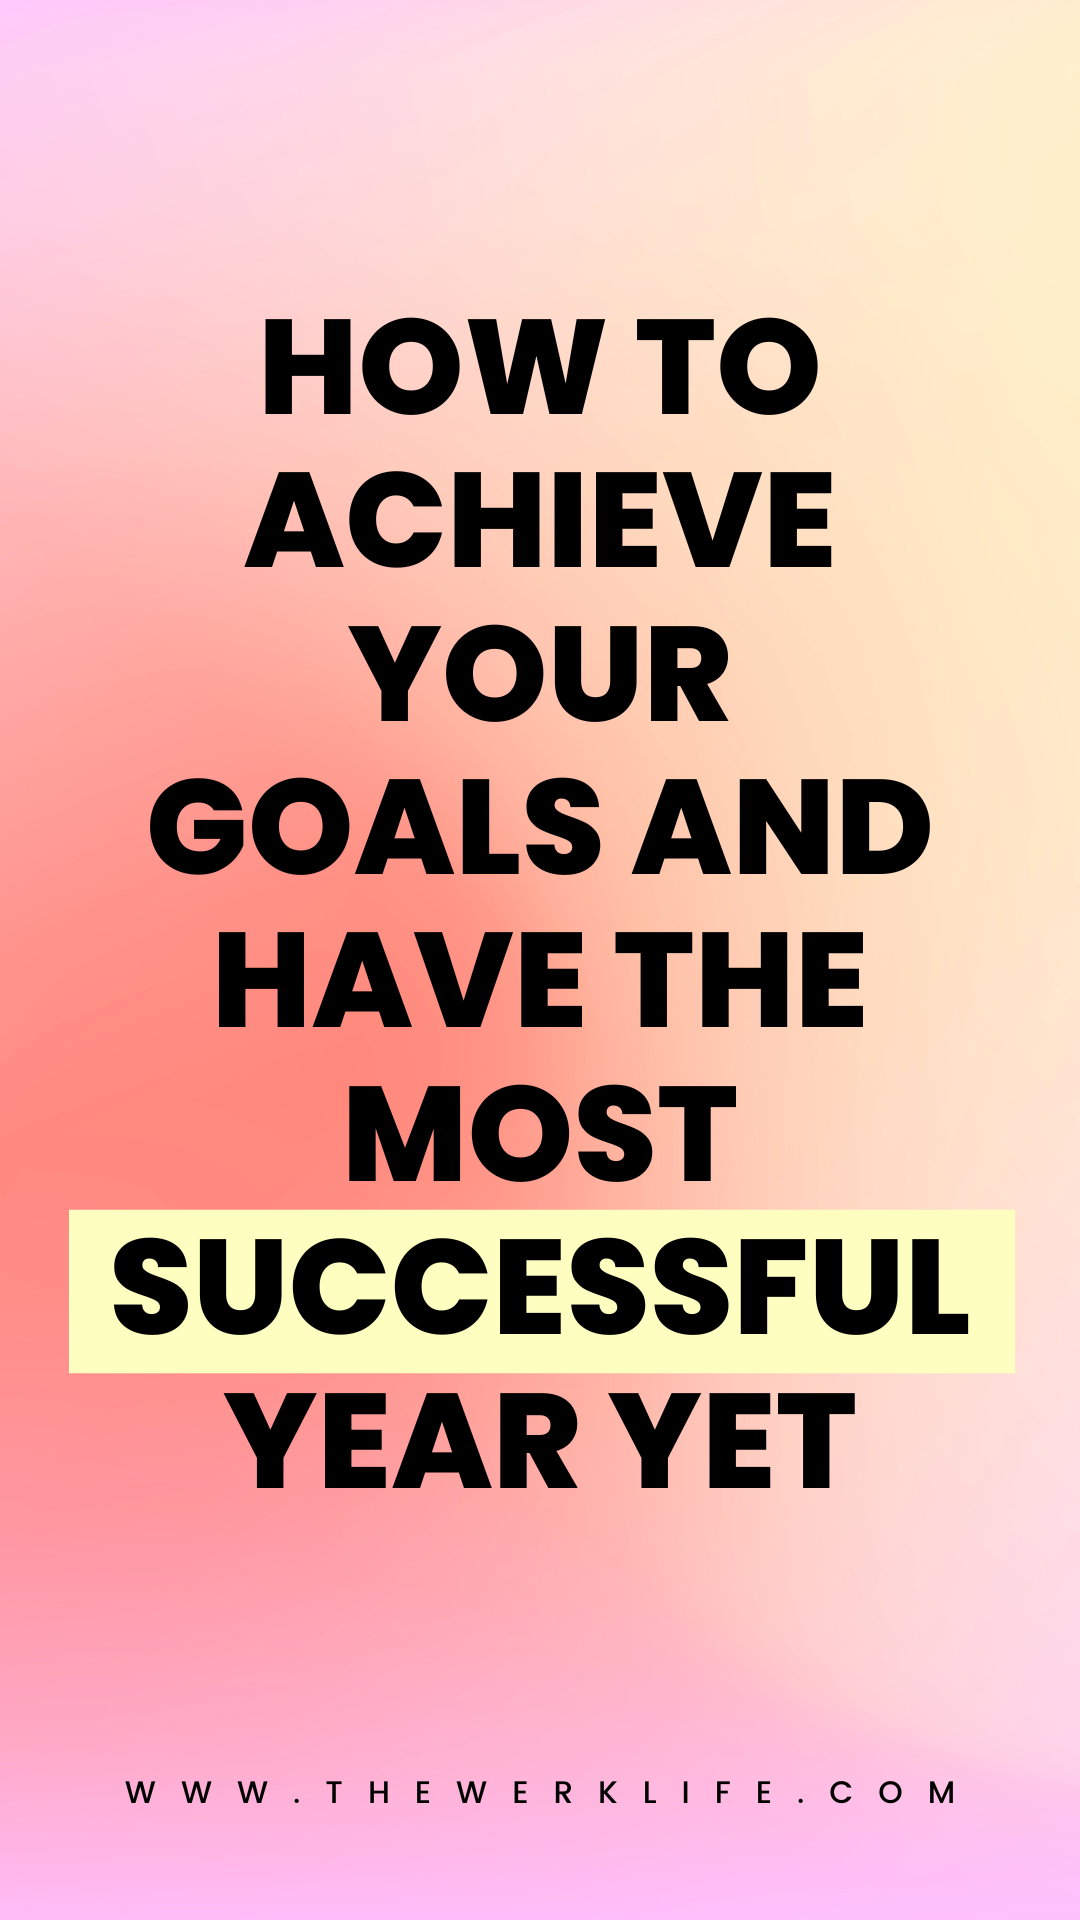 HOW TO ACHIEVE YOUR GOALS AND HAVE THE MOST SUCCESSFUL YEAR YET